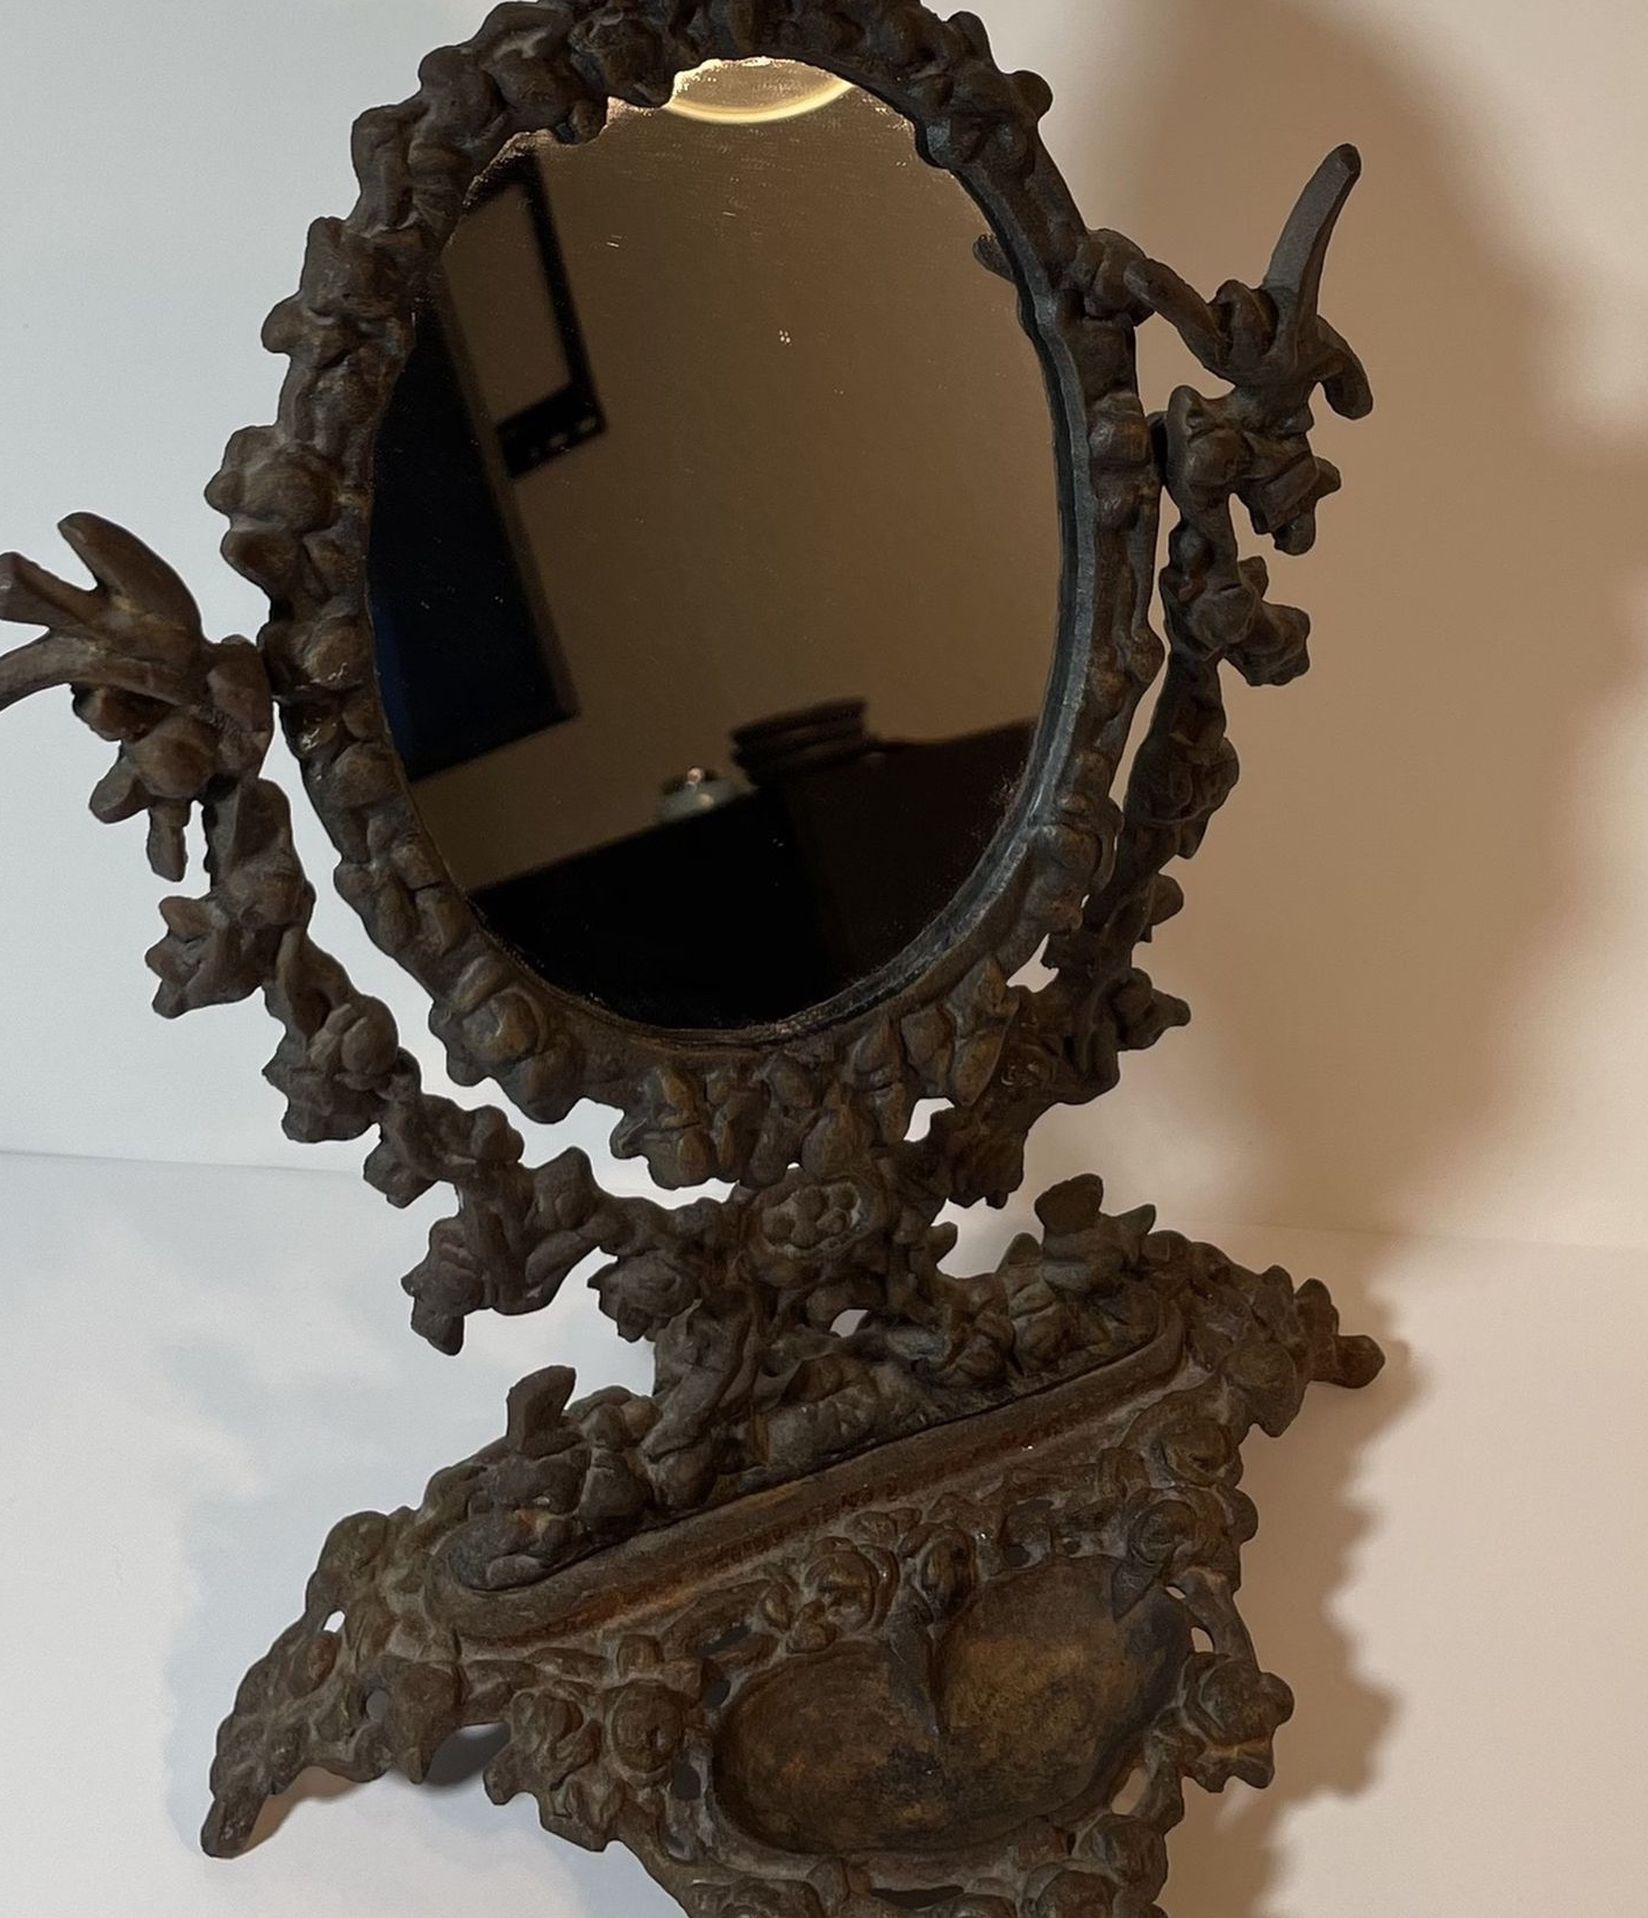 Antique Mirror And Jewelry Holder